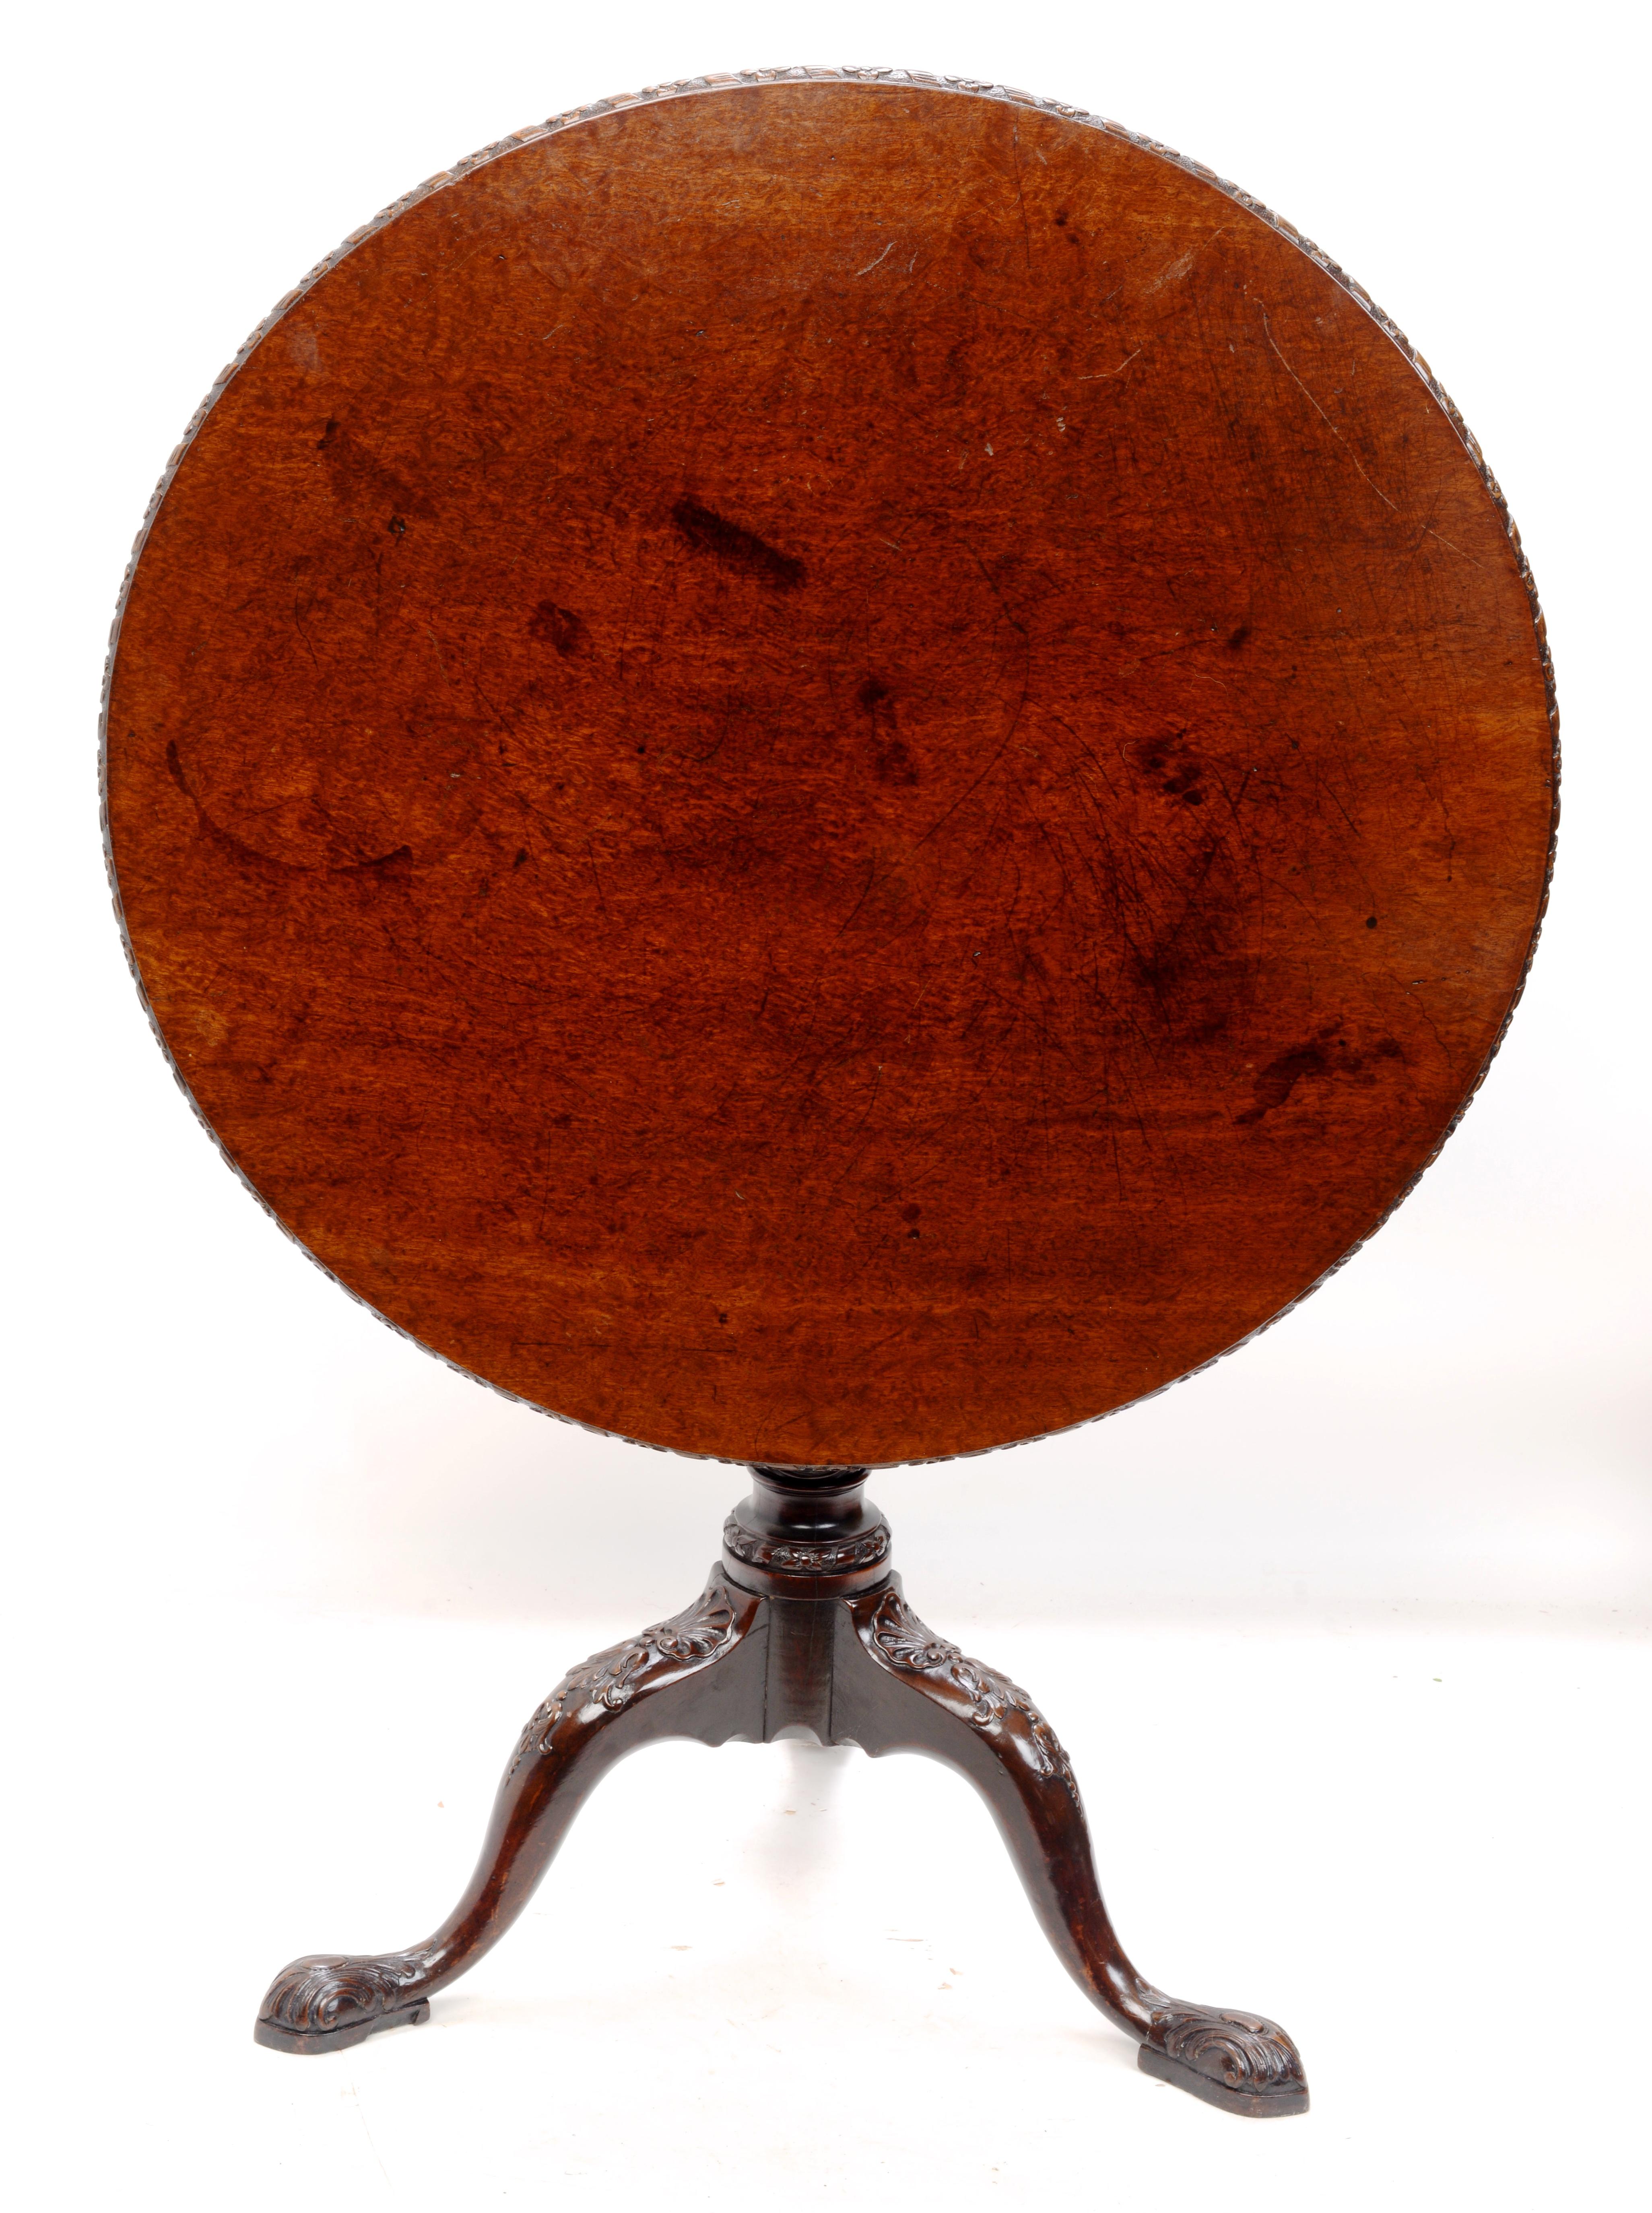 Irish Geo II Plum Pudding Mahogany Tilt and Turn Tripod Tea Table, c1750. Beautifully carved top, legs, pedestal and feet. The table has a great, rich patina. The circular top has floral carved border. The top sits on the original rotating birdcage